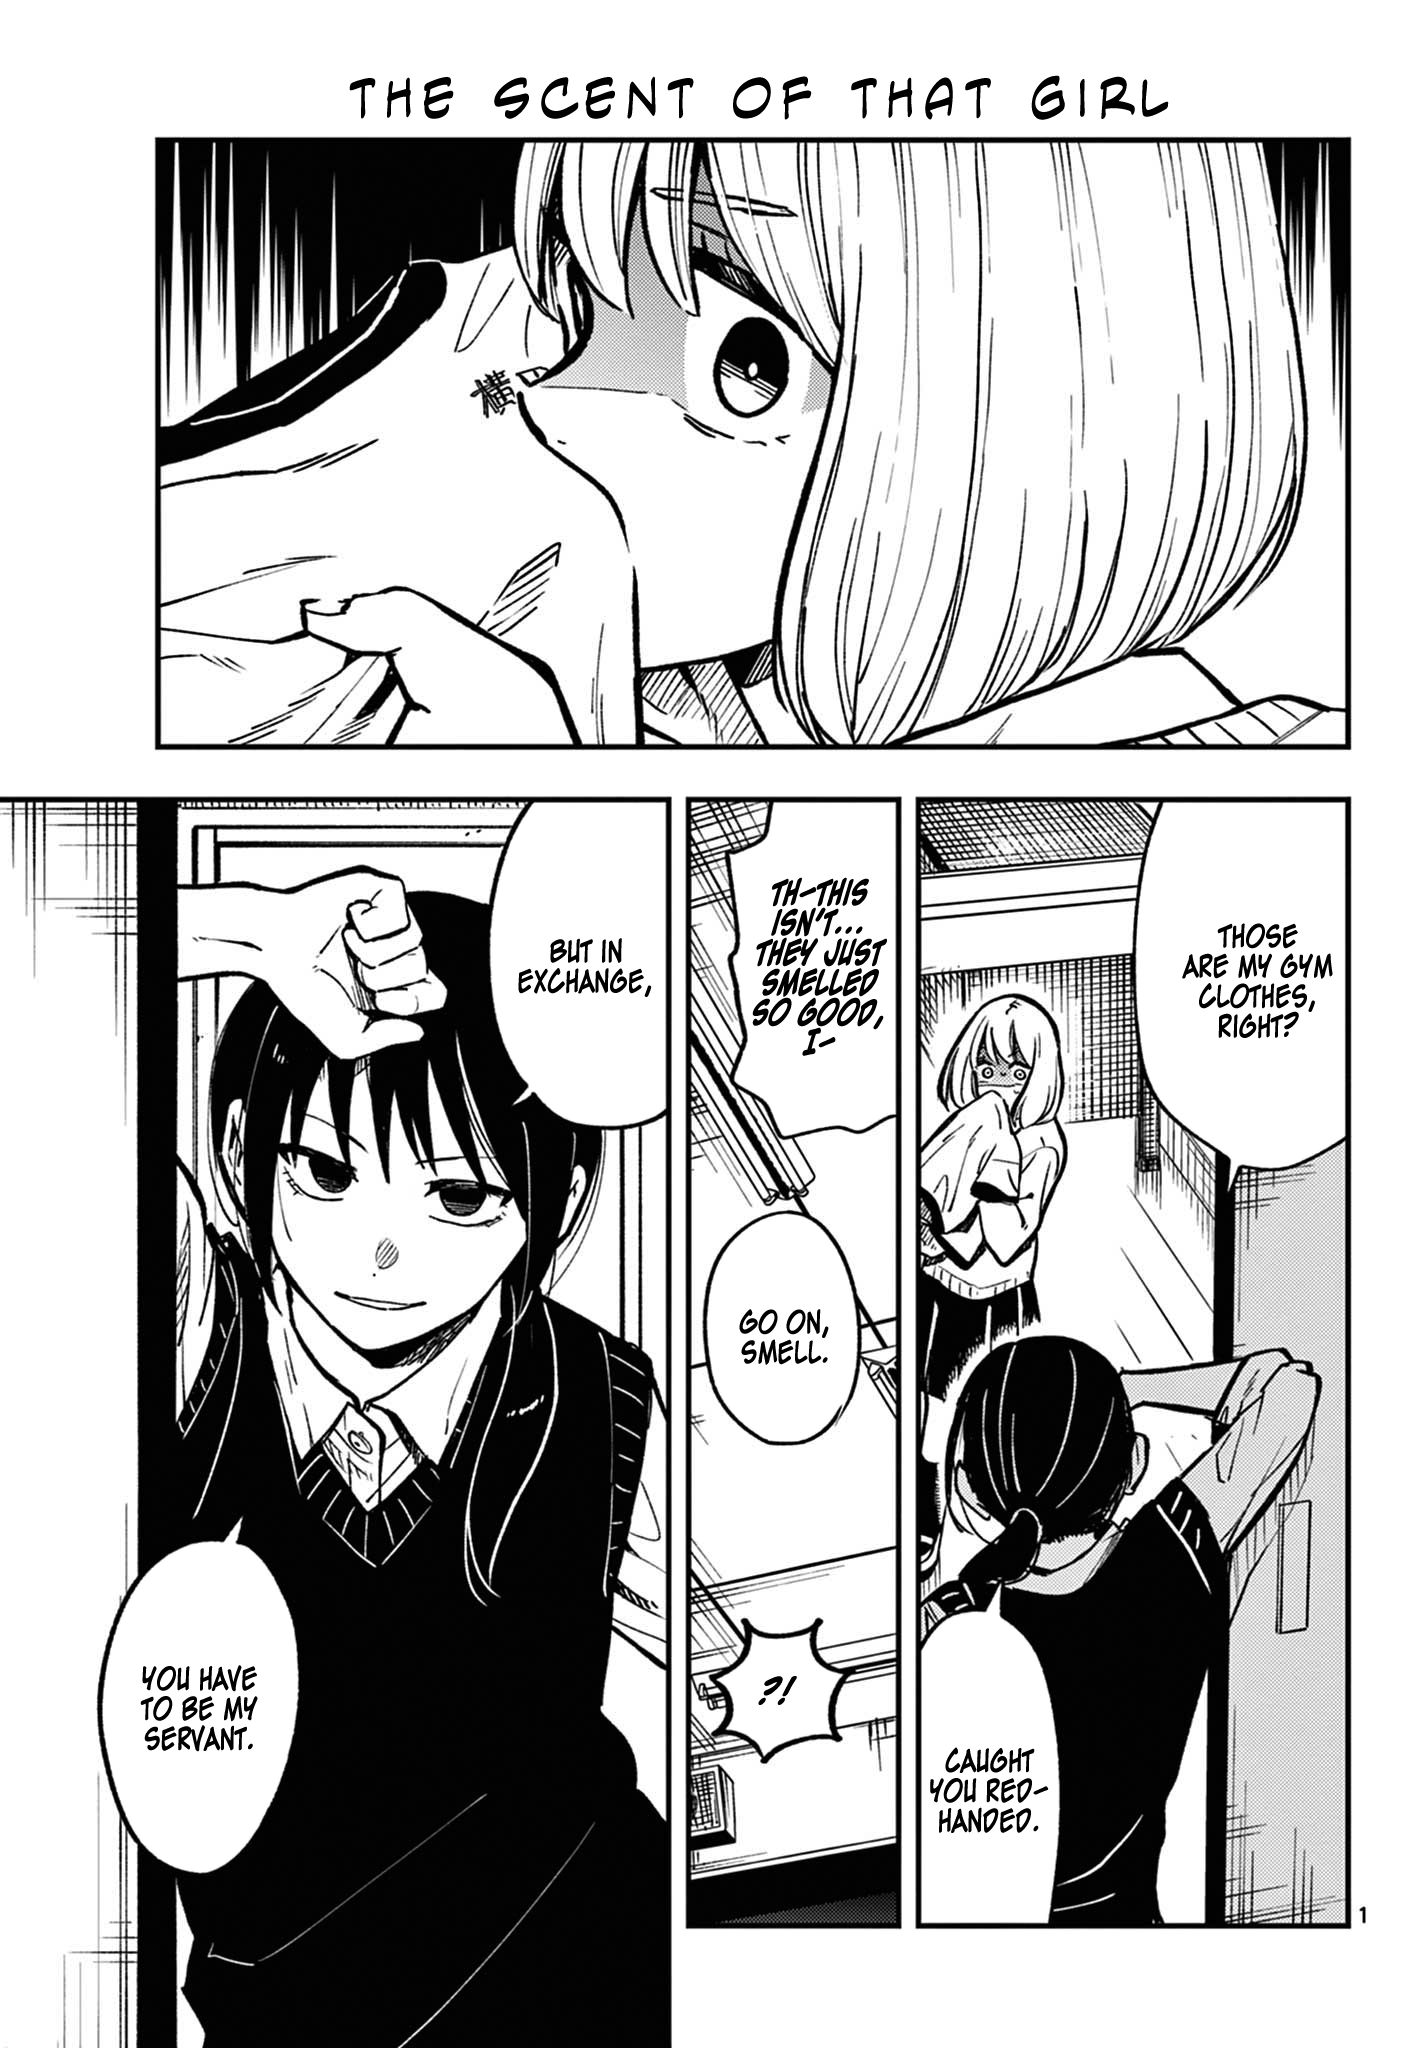 The Scent of that Girl manga